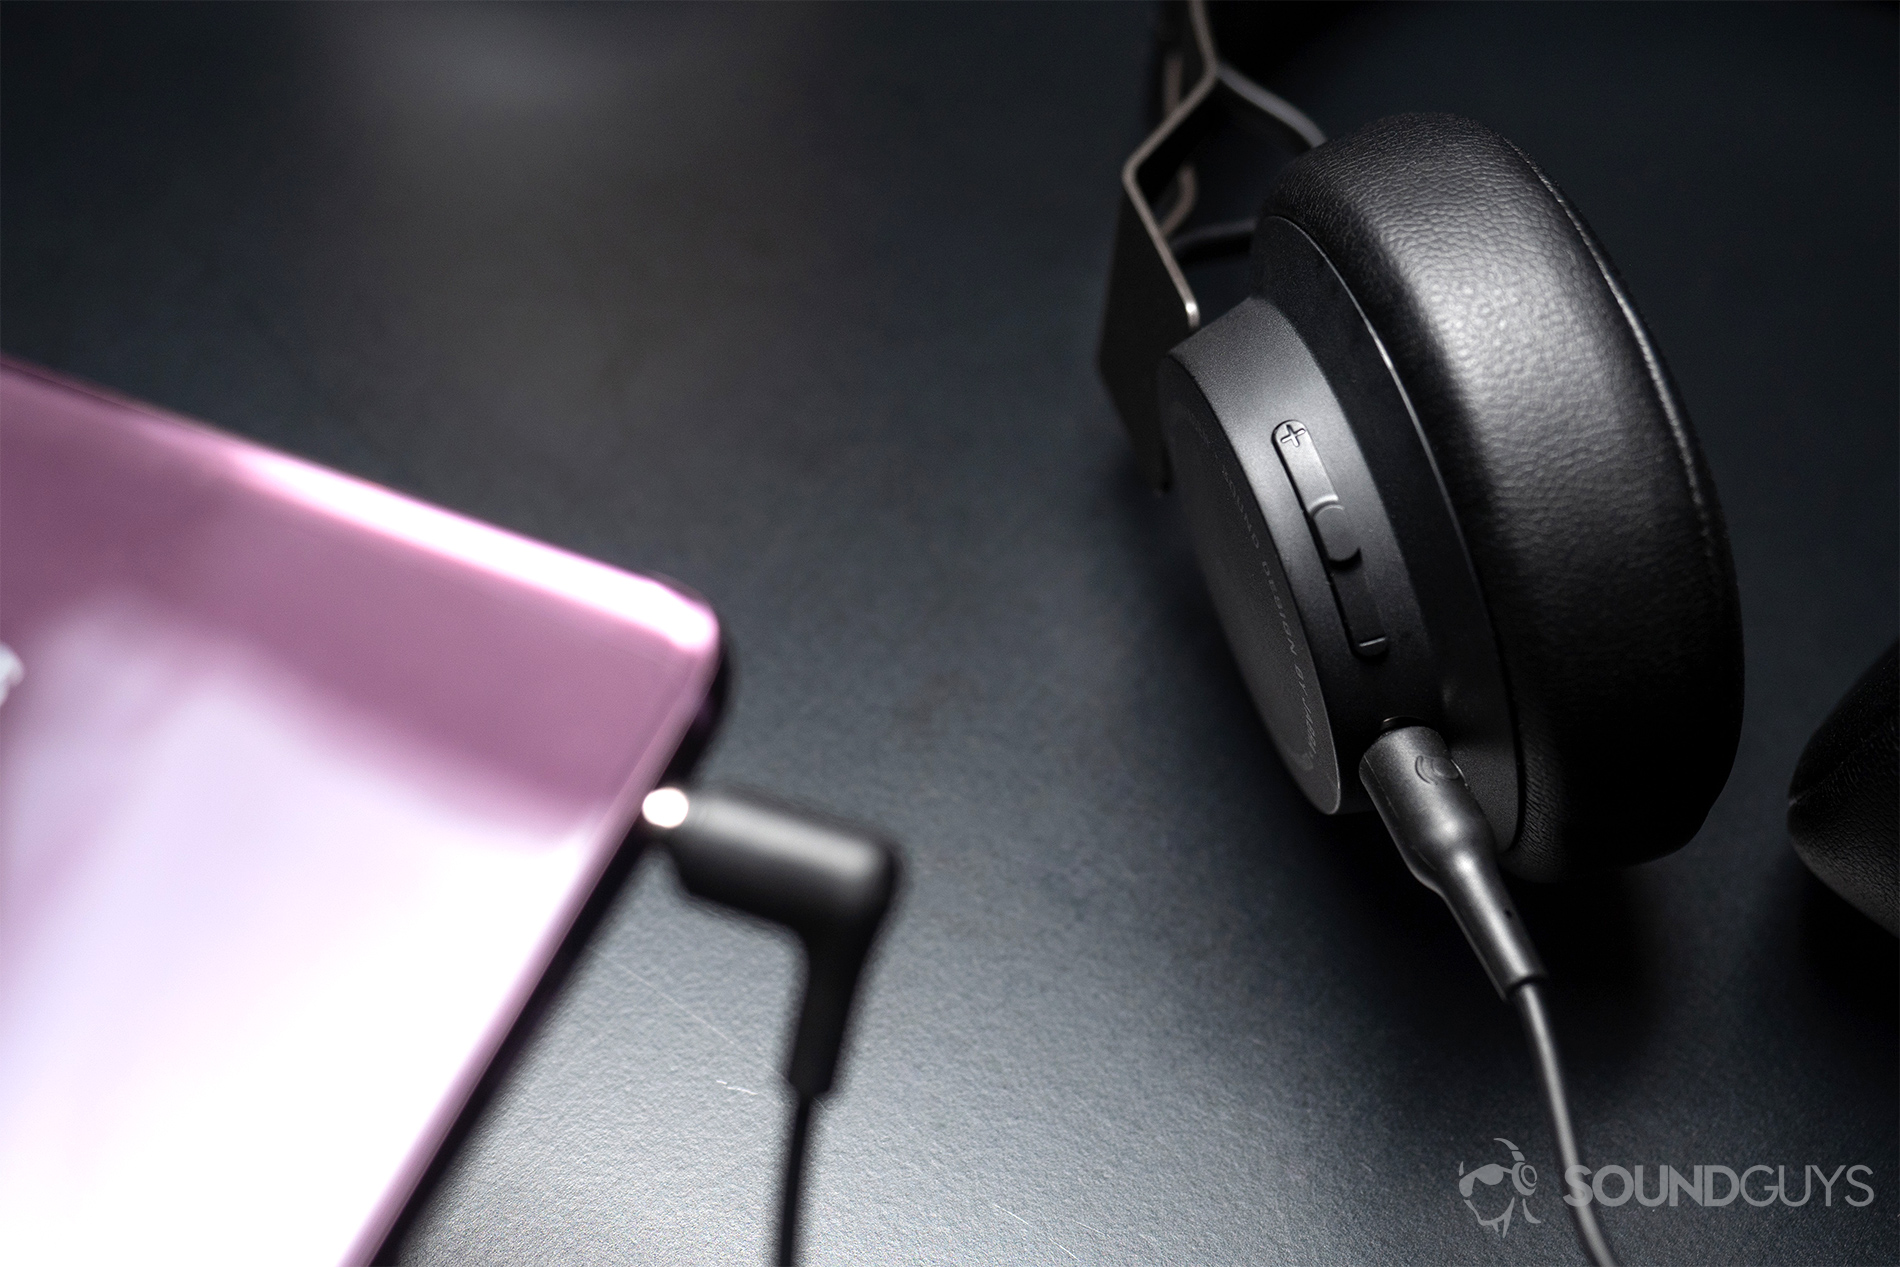 A picture of the Jabra Move Wireless connected to the Samsung S9 in lilac with the headphone cable going from the phone to the headphones,. which are in the right side of the image.